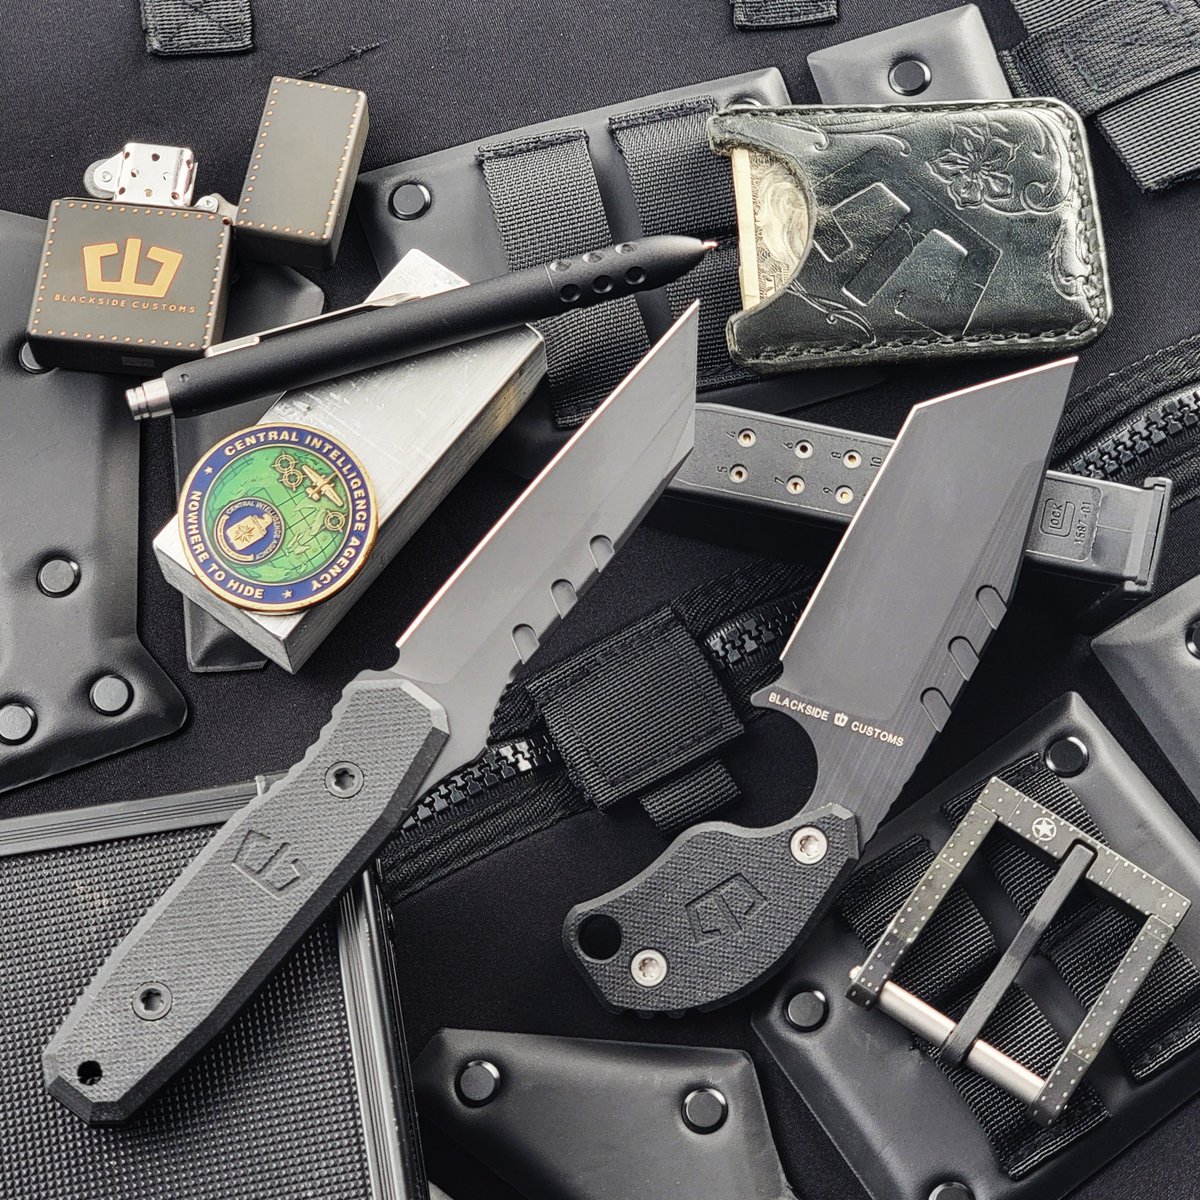 Gear up for any mission with Blackside Customs Tactical EDC! From rugged durability to tactical precision, their lineup ensures you're always prepared. Blackout your EDC with gear built for the toughest challenges. #EDC #EverydayCarry #BlacksideCustoms